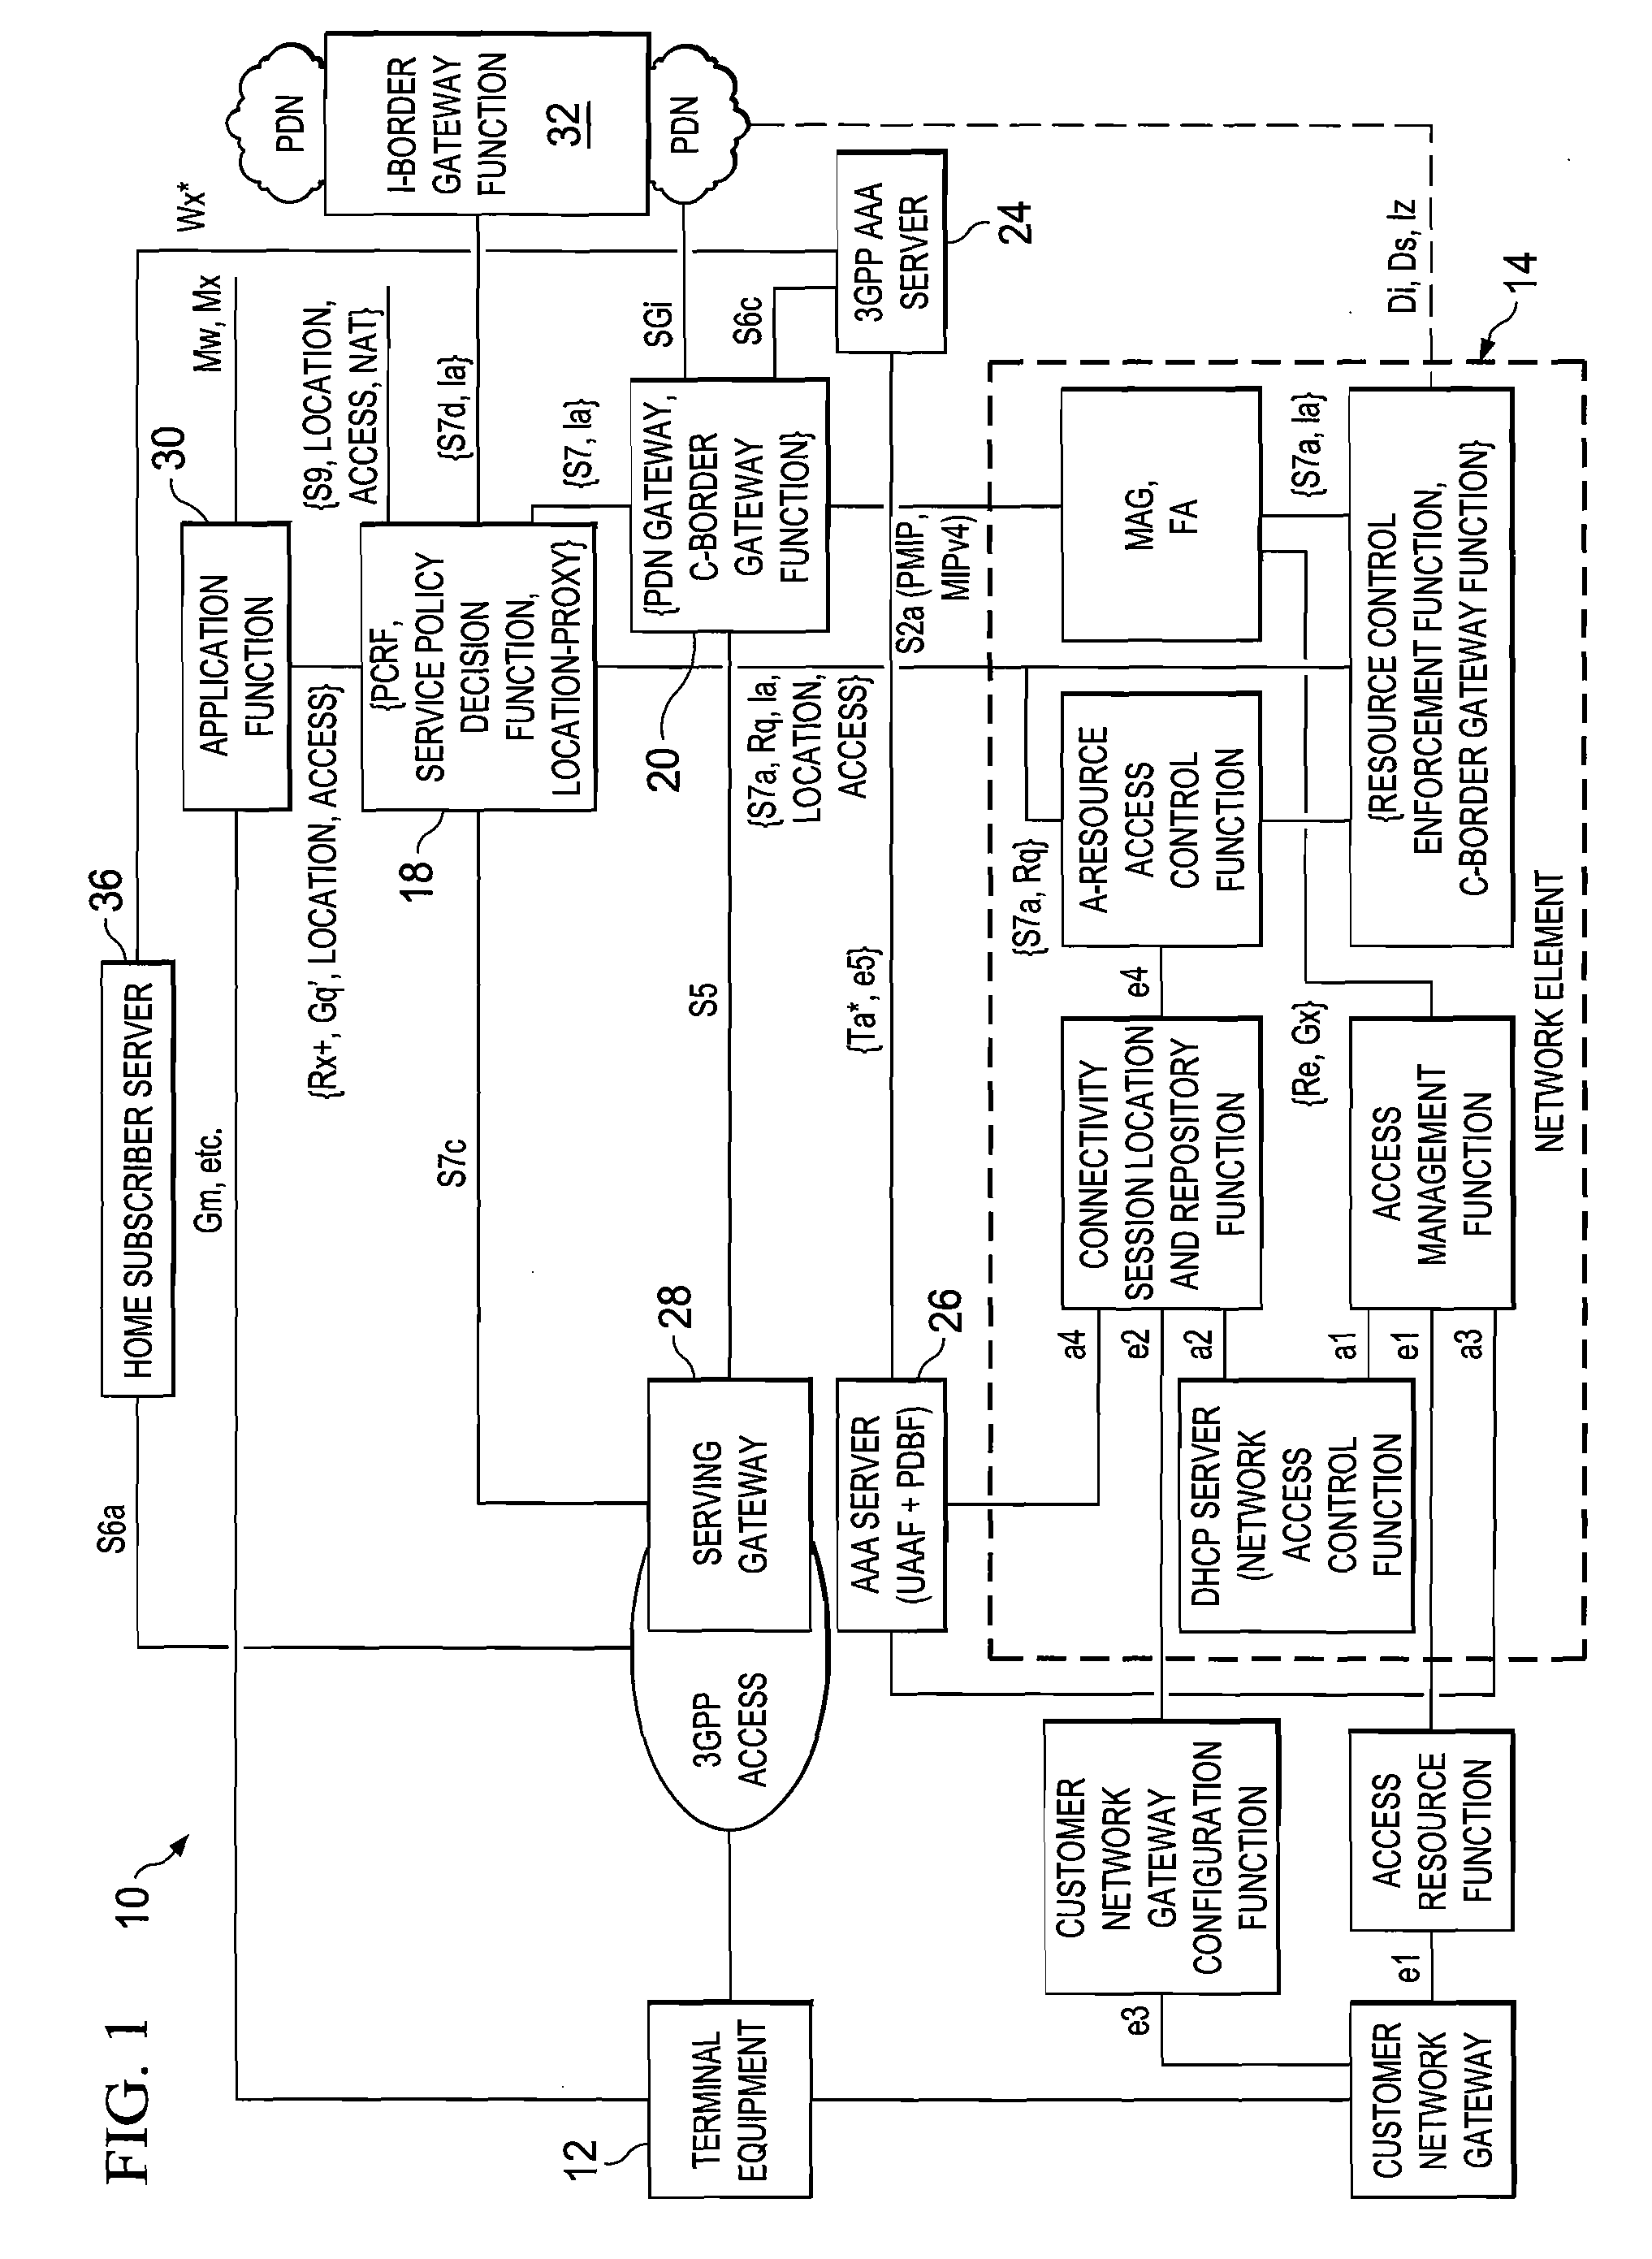 System and method for providing a converged wireline and wireless network environment